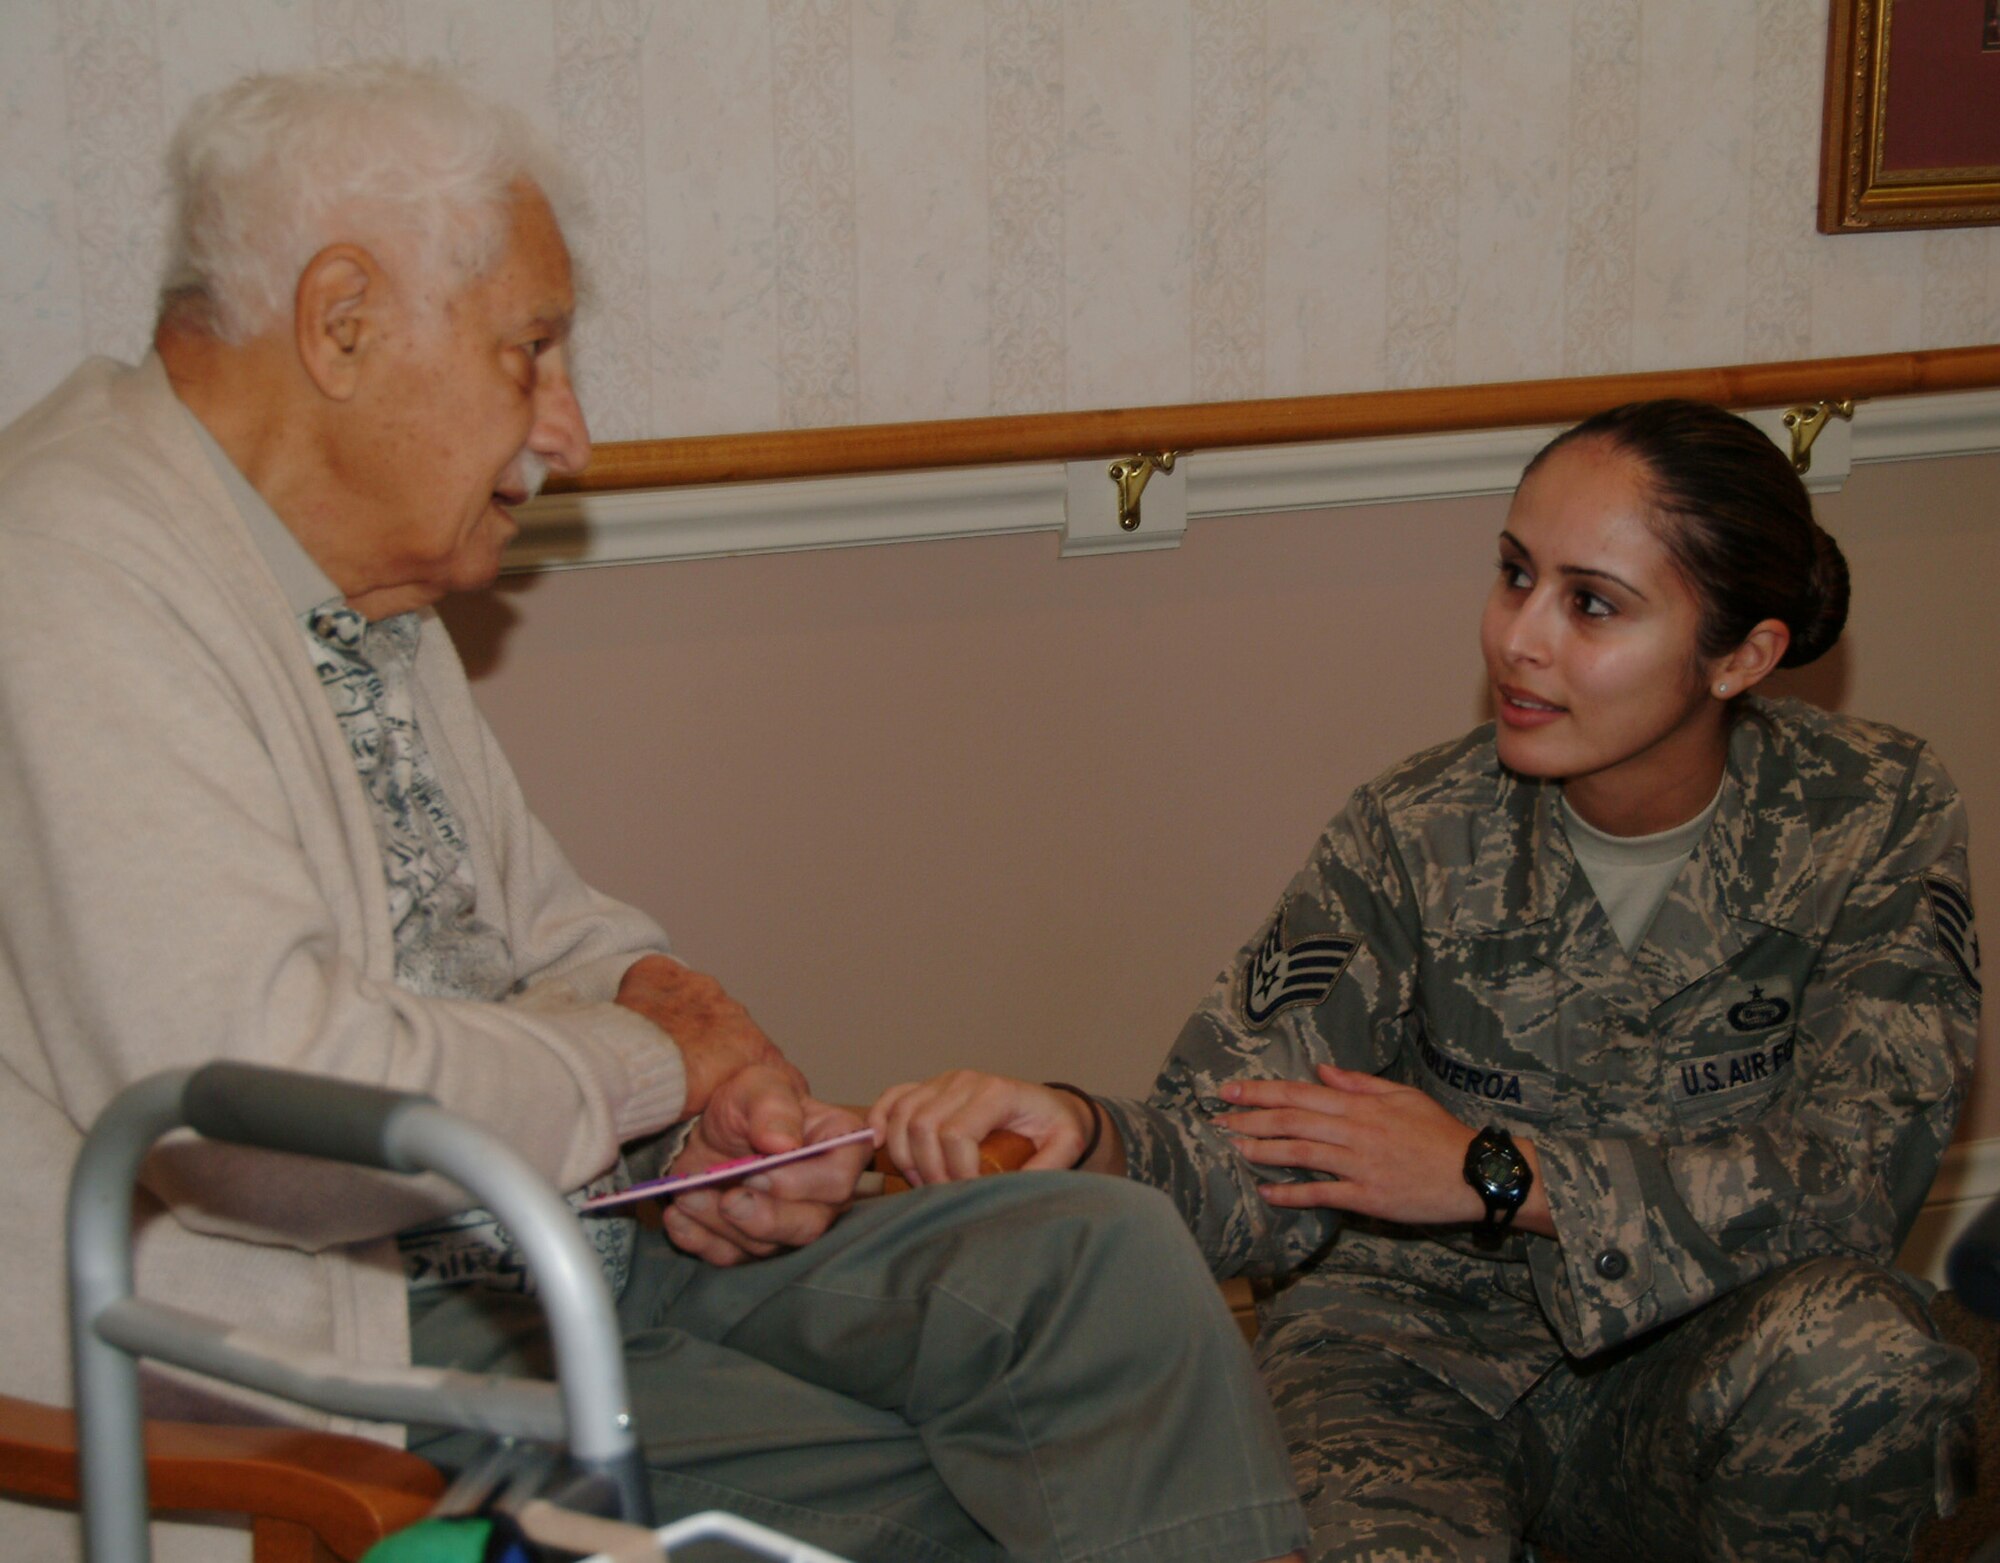 Staff Sgt. Iris Figueroa, 68th Electronic Warfare Squadron, listens to Army veteran Paul Feb. 14 at the Sterling House in Niceville Fla.  More than 50 active duty 53d Wing members presented vets in nursing homes around the local area with cards and candy on Valentine's Day.  U.S. Air Force photo by Master Sgt. Andrew Leonhard.  